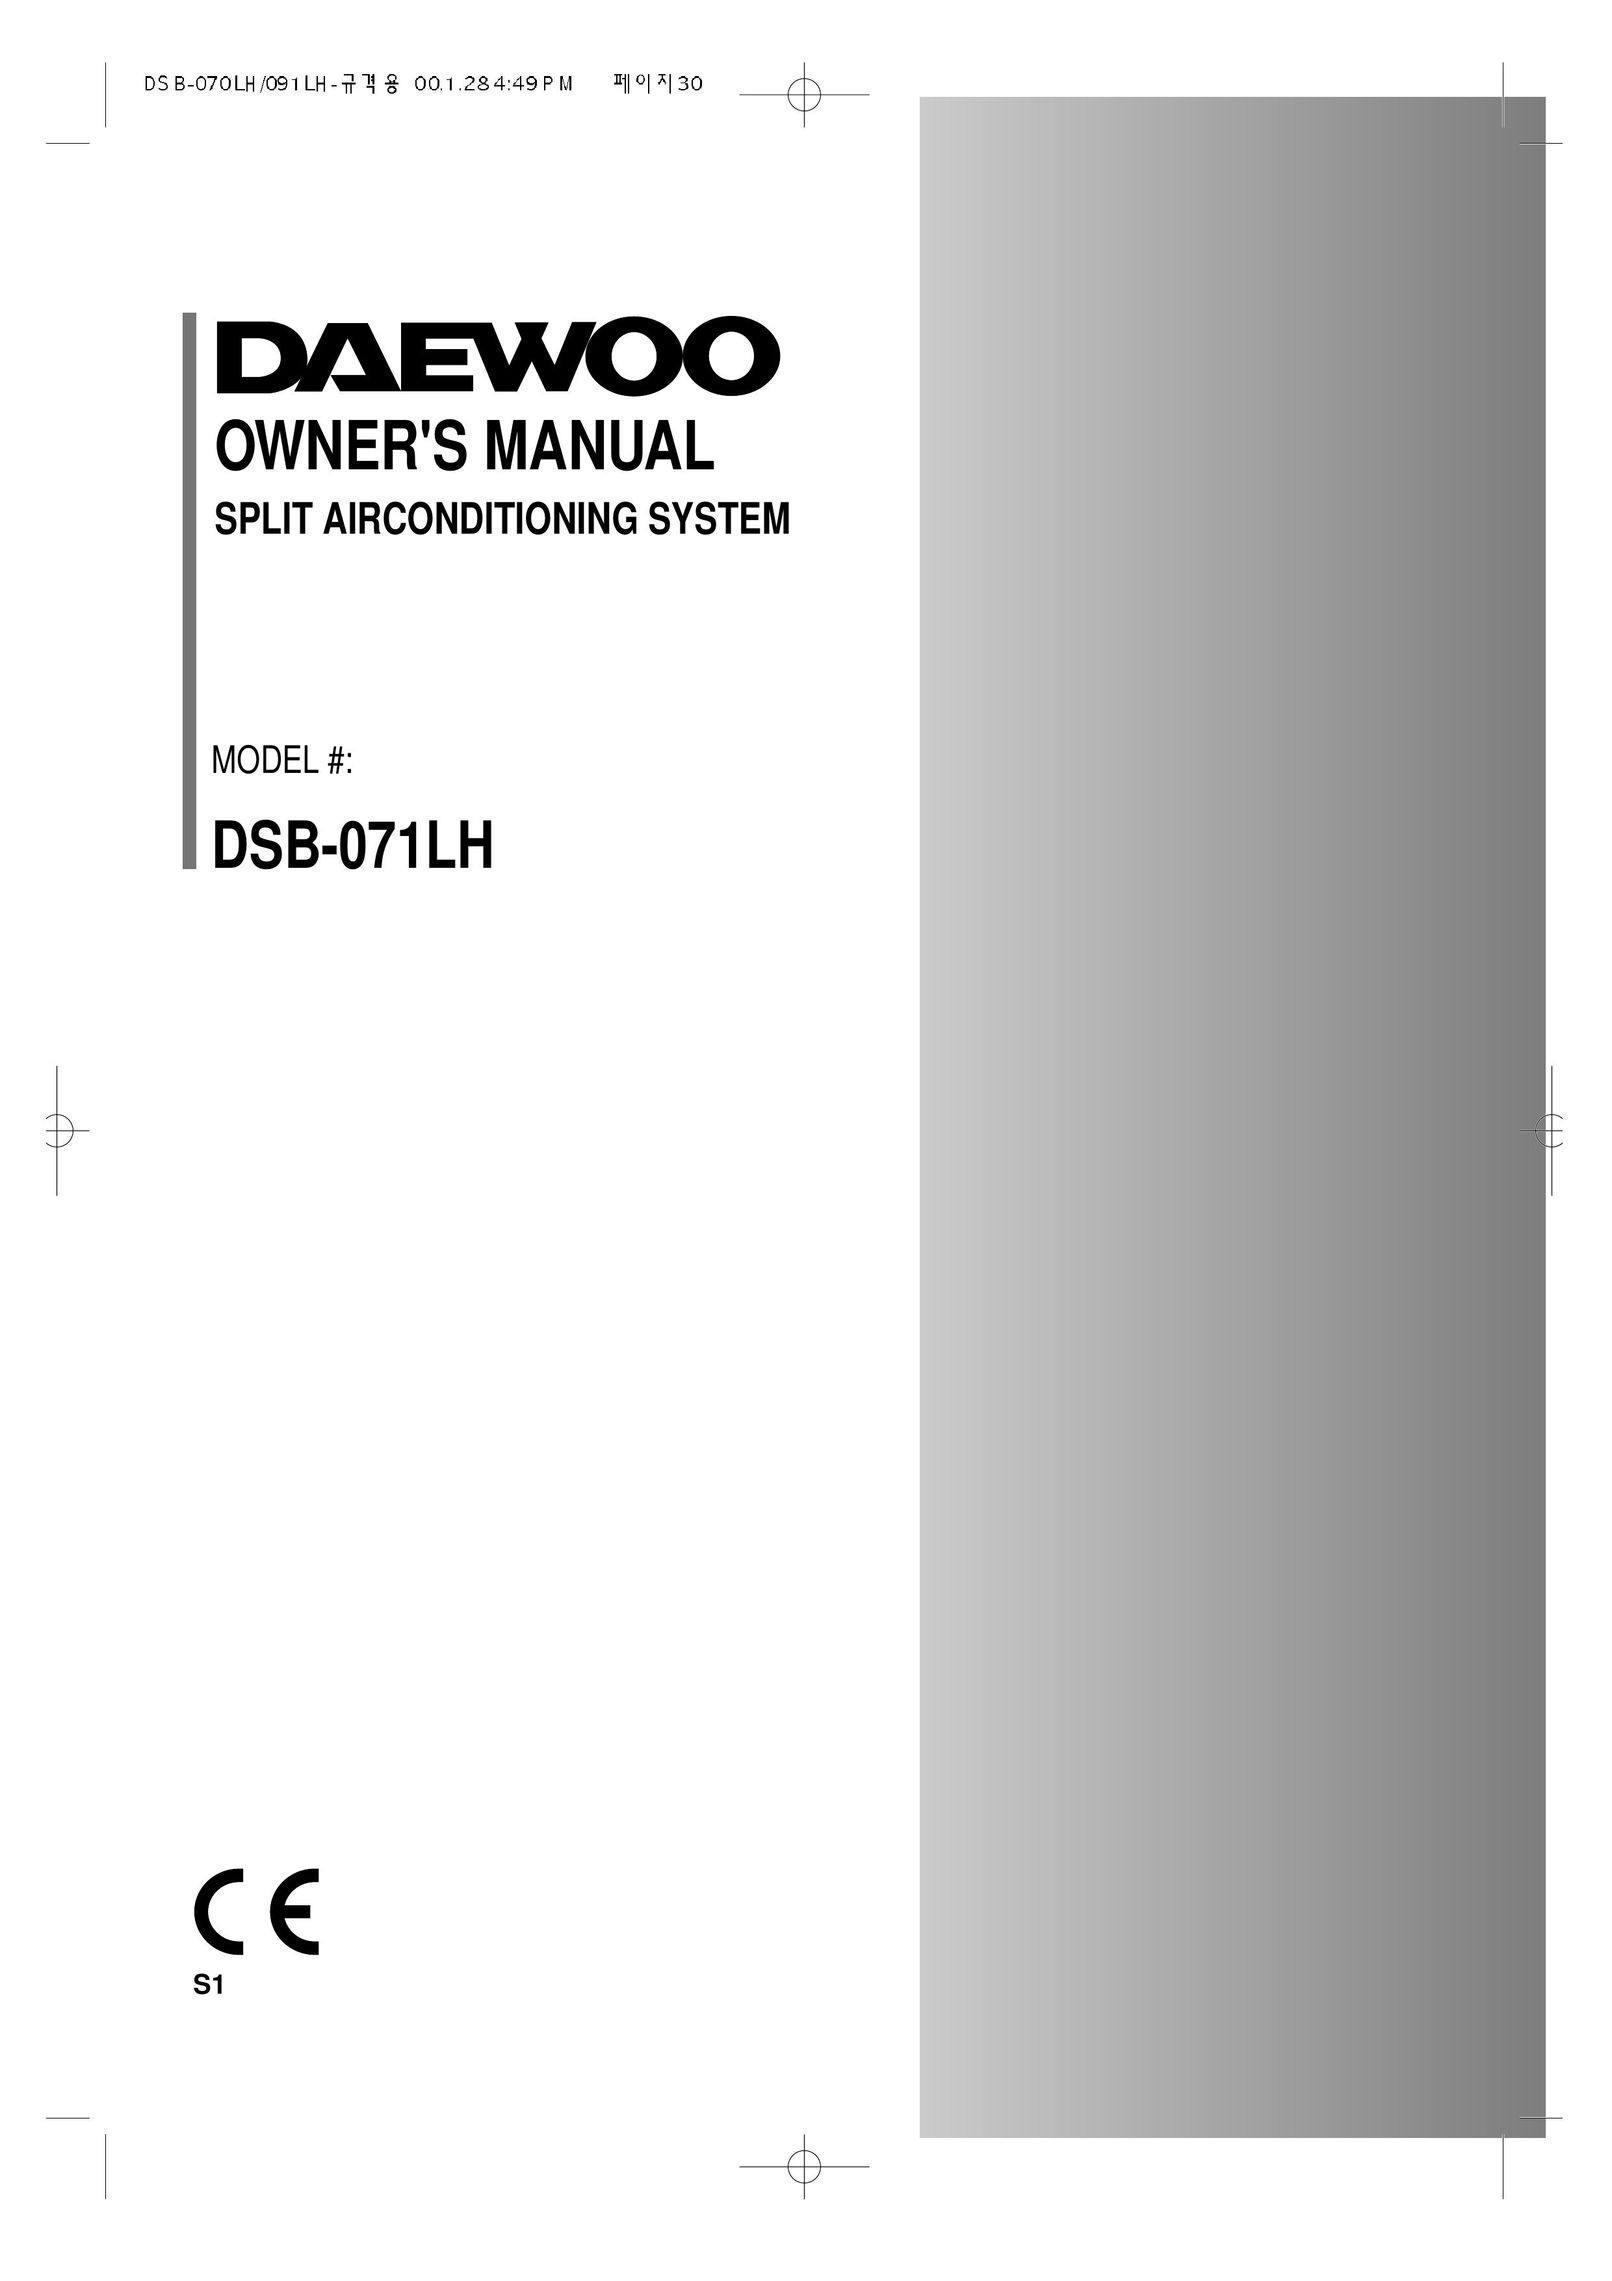 Daewoo Split Airconditioning System Air Conditioner User Manual